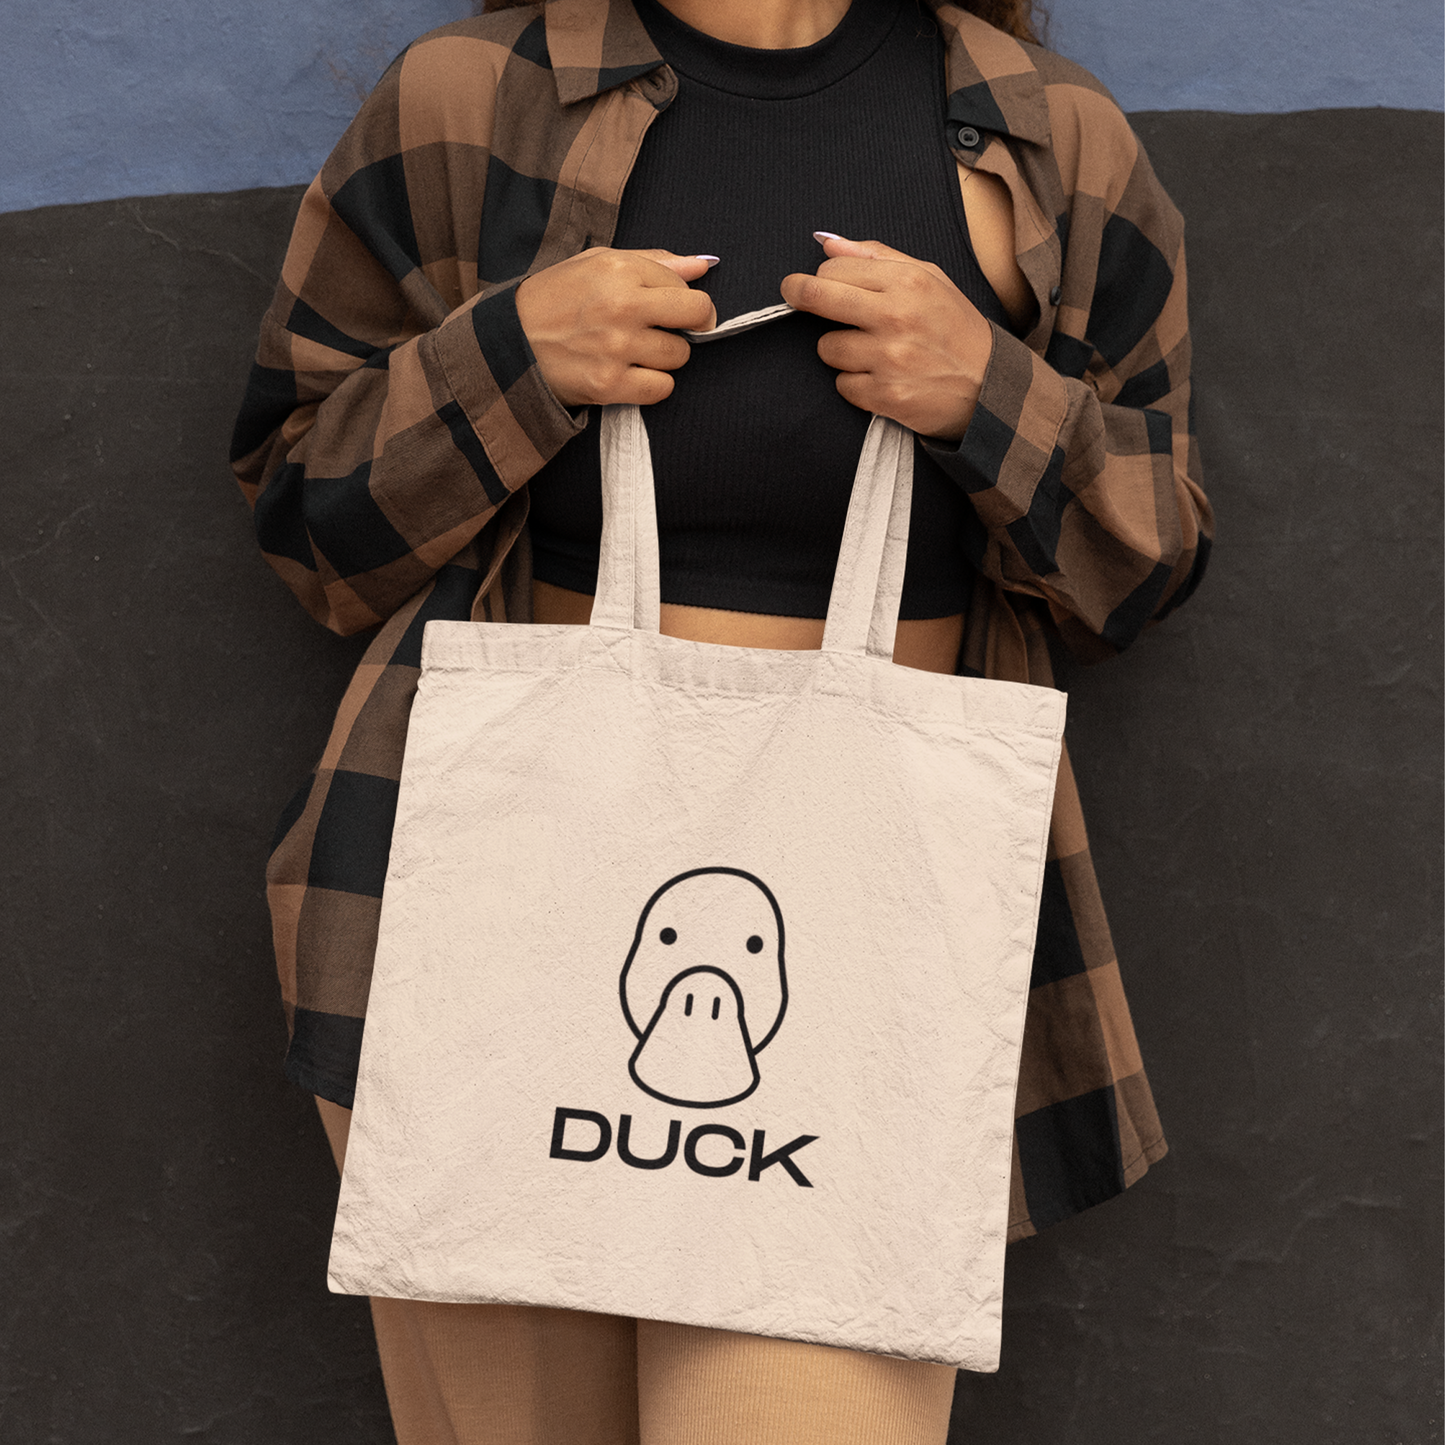 Just Say "Duck" Canvas Tote Bag